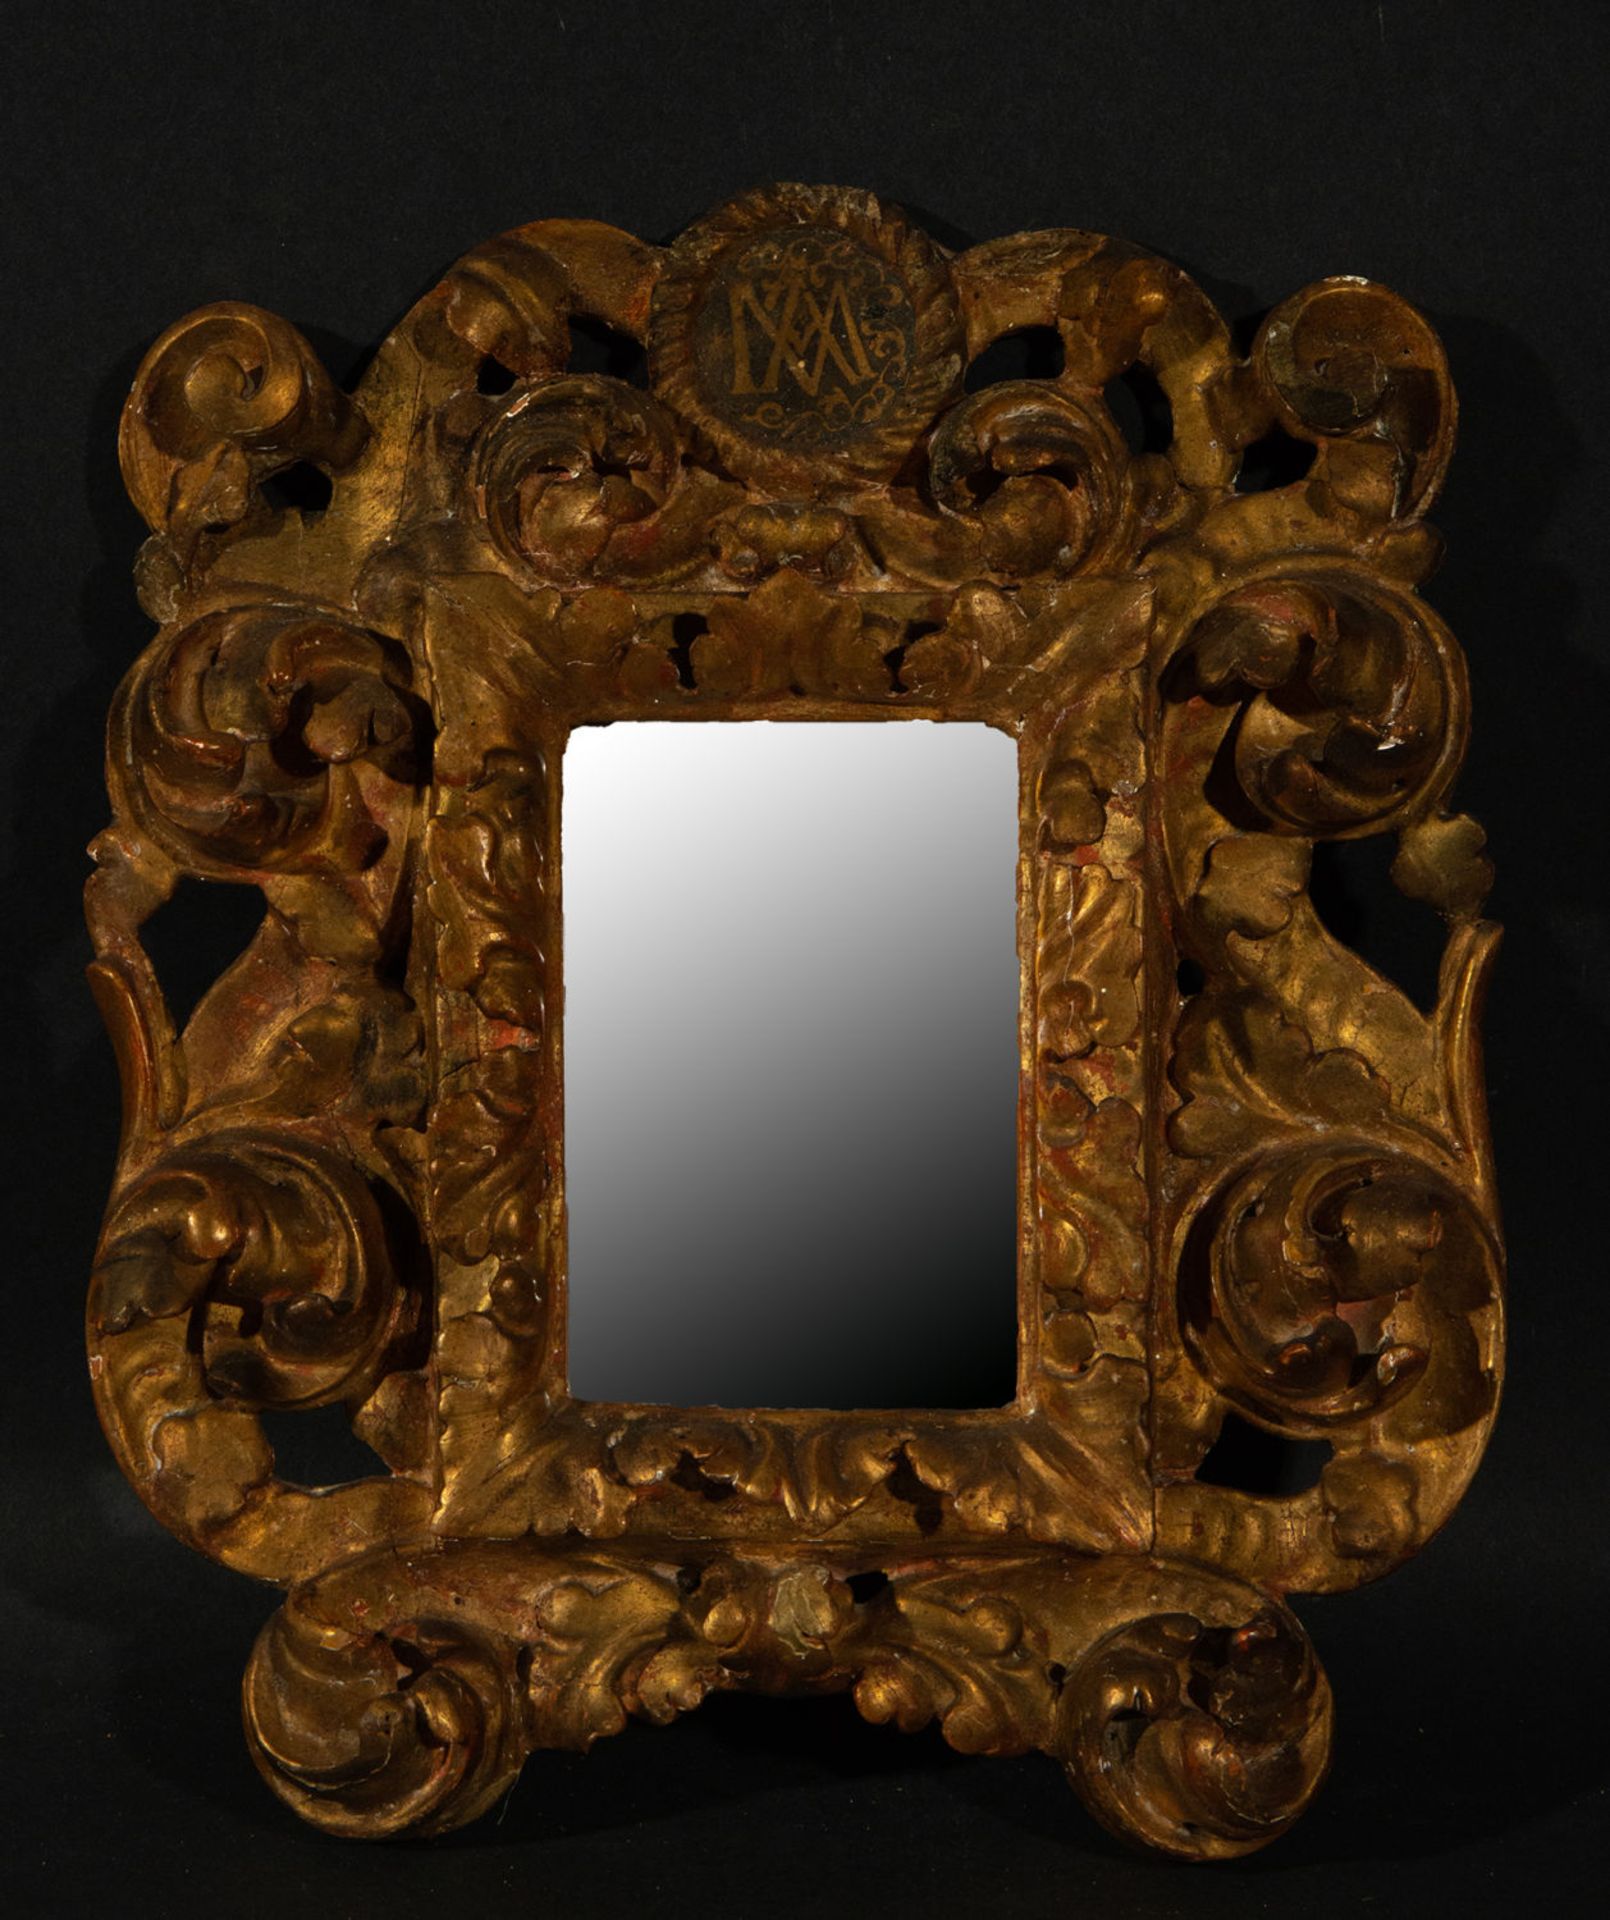 Cornucopia mirror from the 18th century, with Anagram of the Virgin Mary